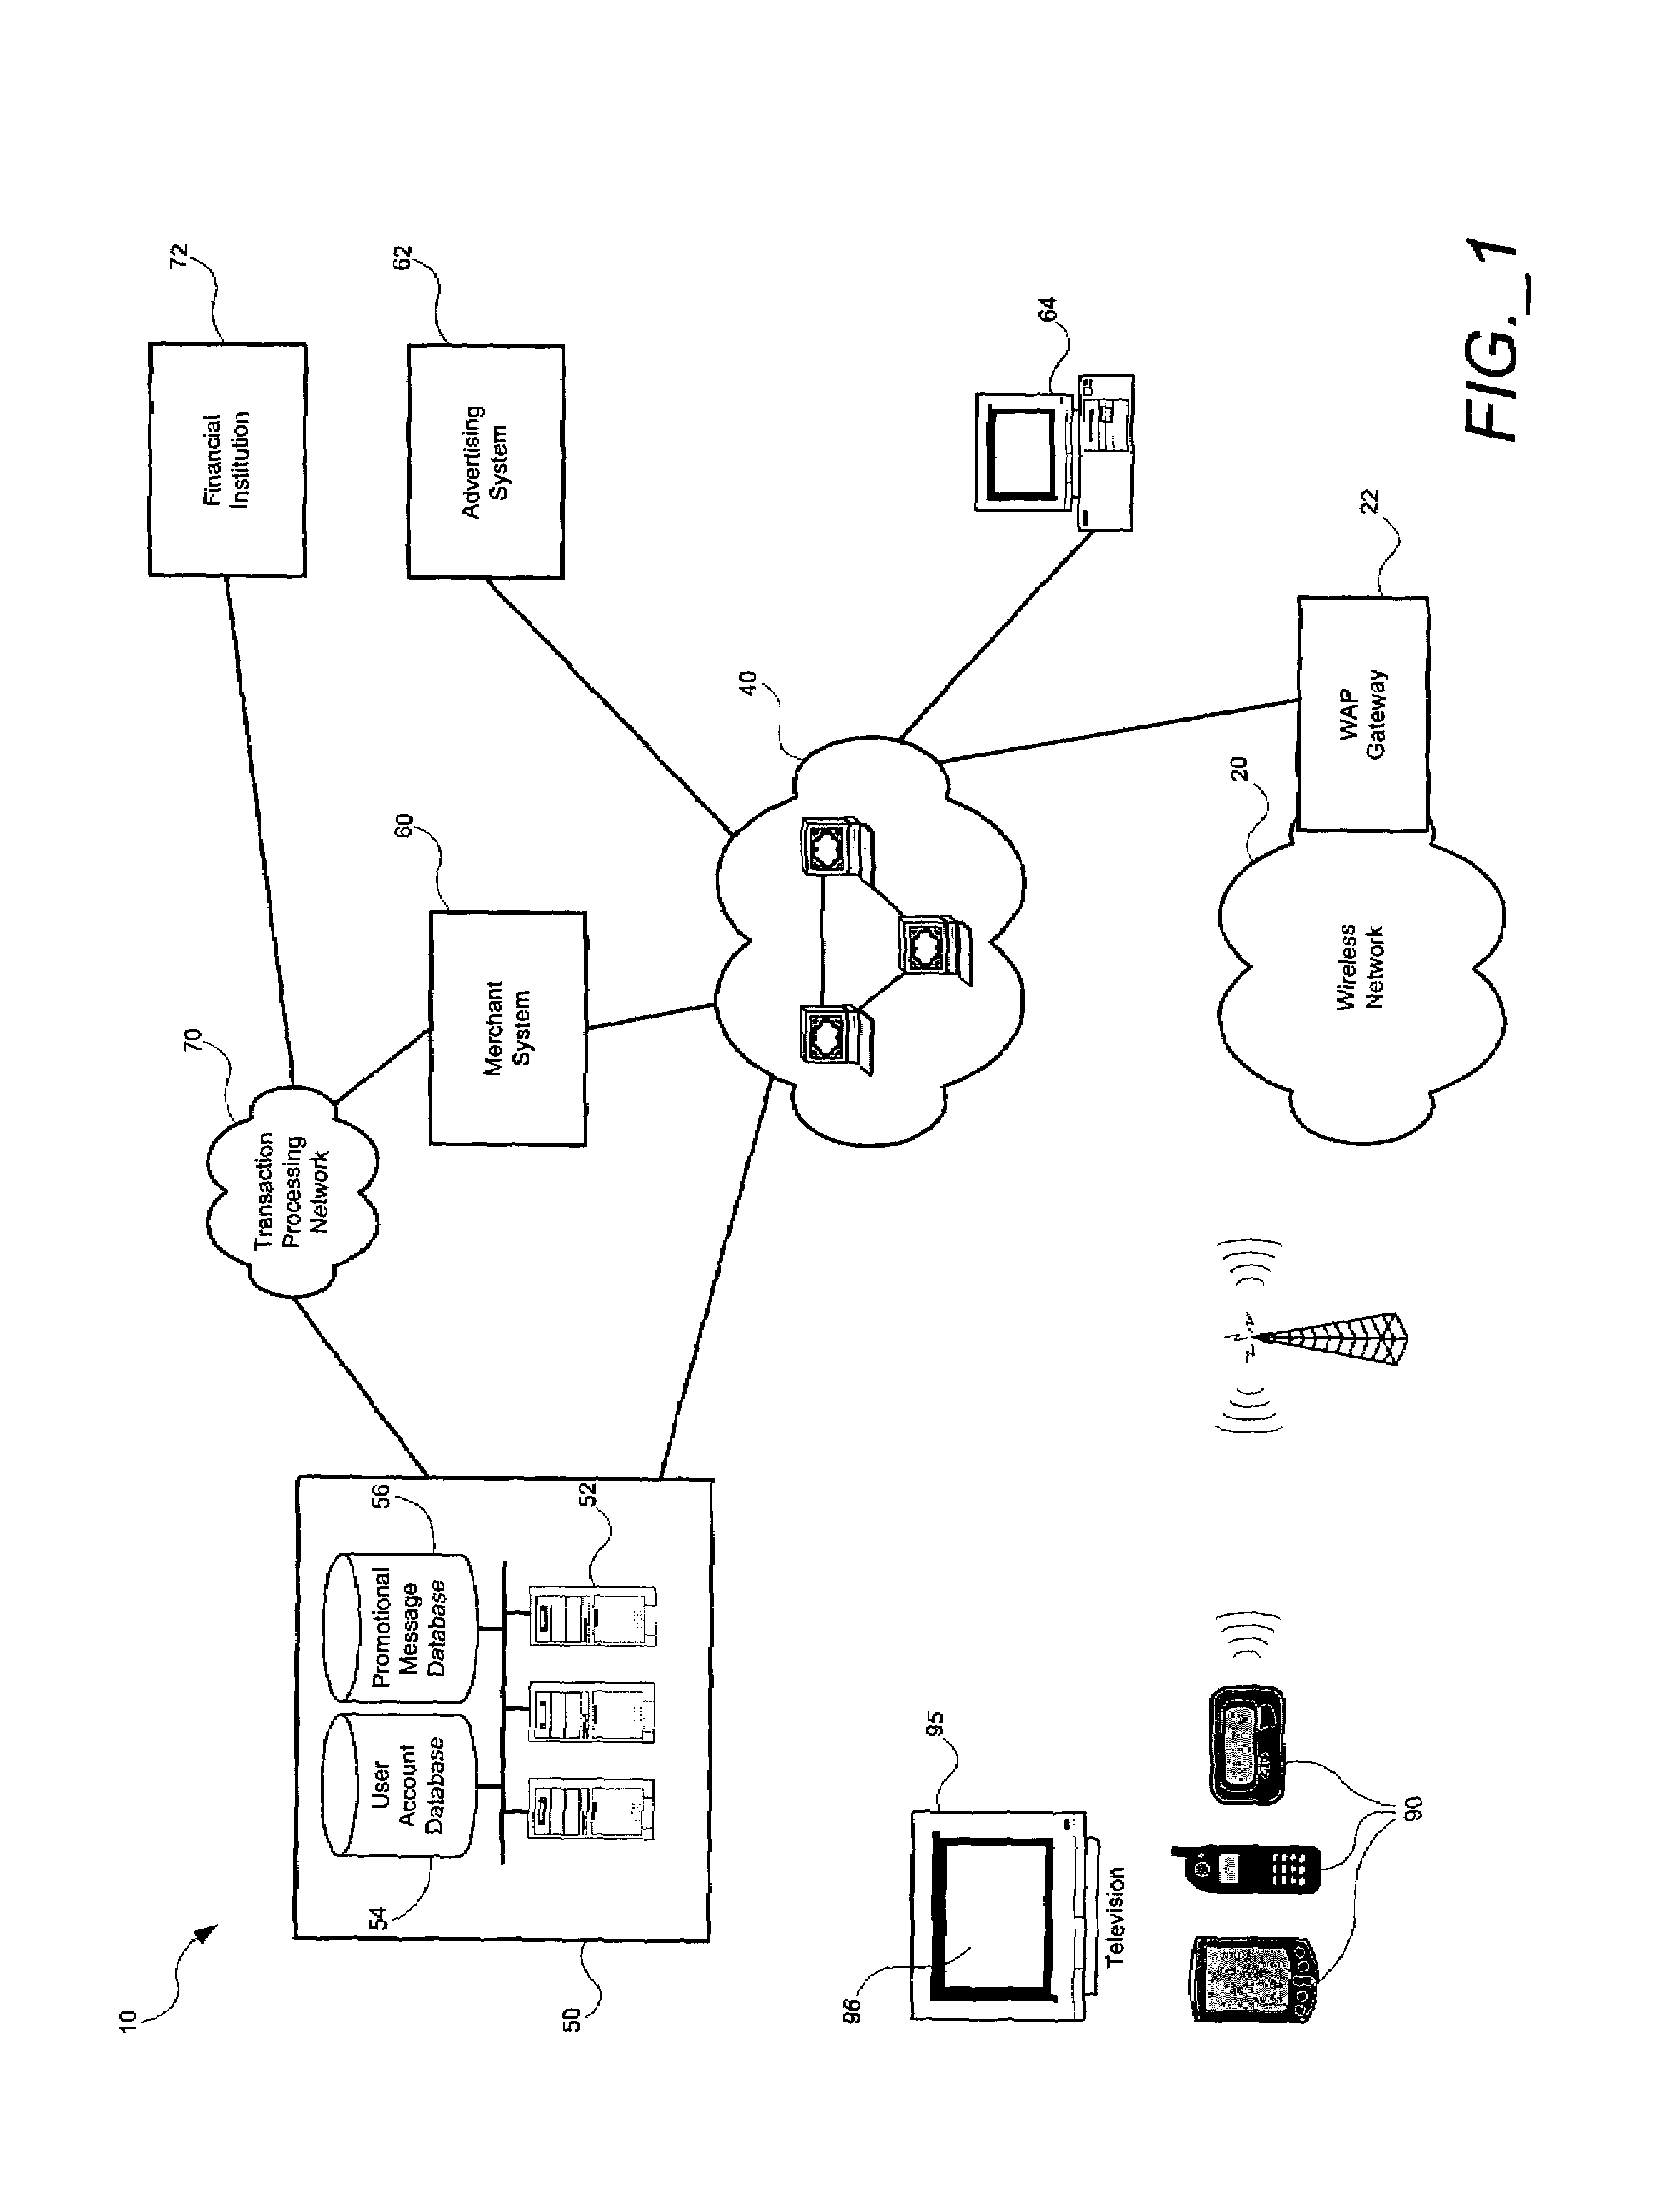 Block-based encoding and decoding information transference system and method